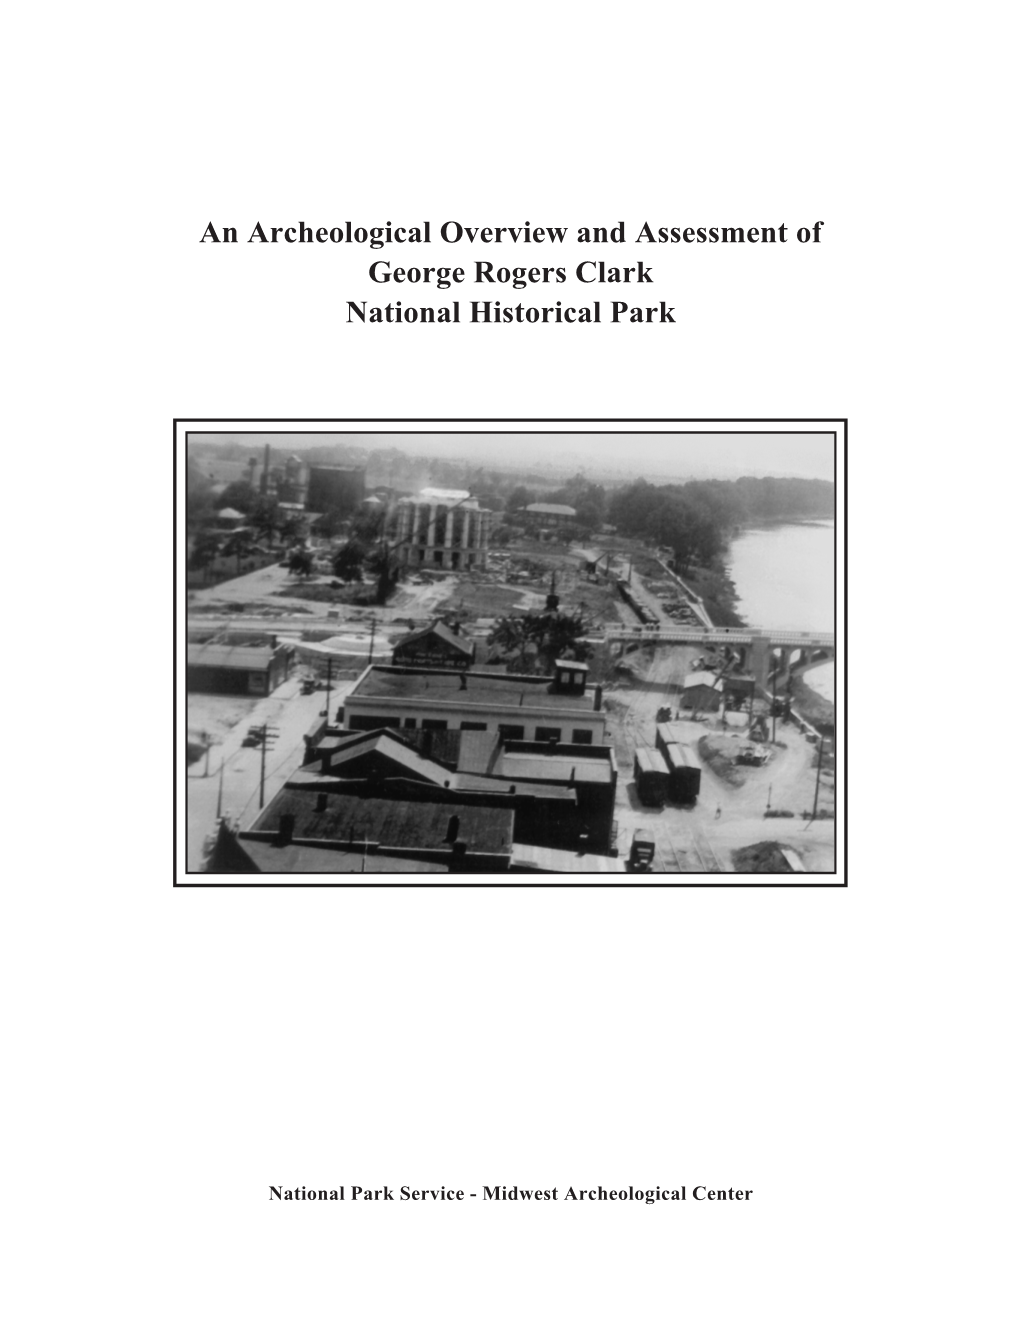 An Archeological Overview and Assessment of George Rogers Clark National Historical Park